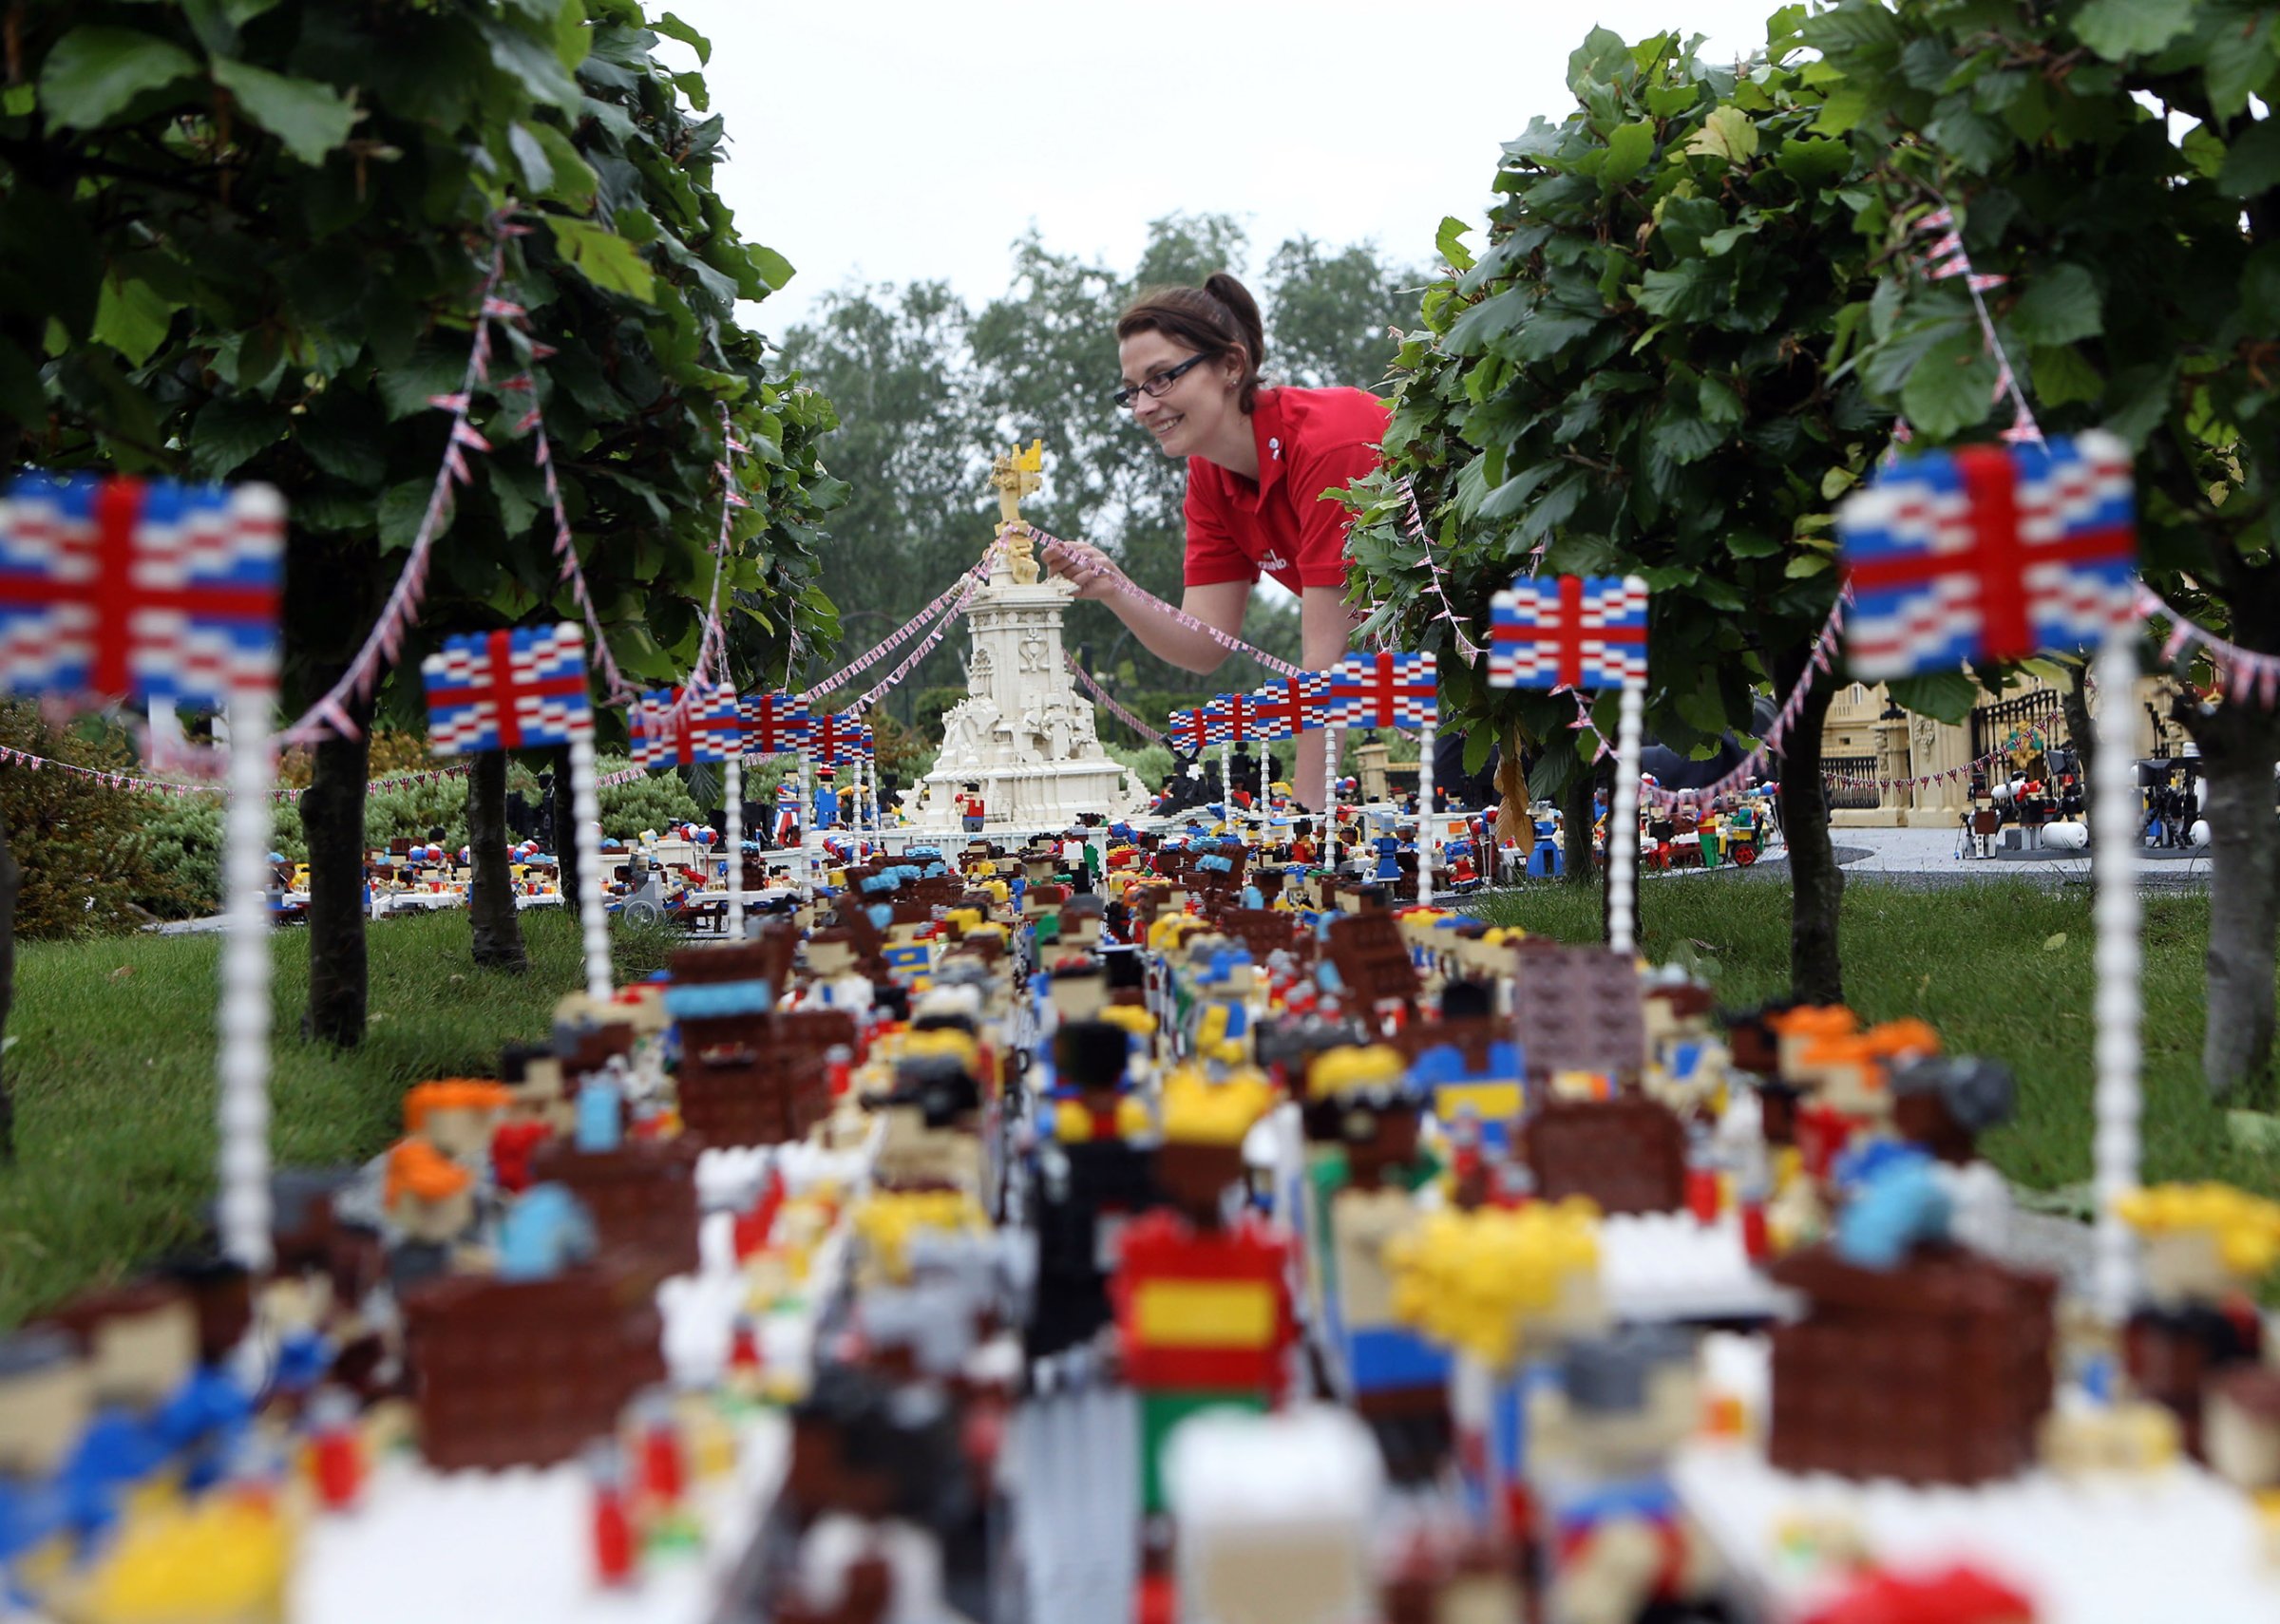 Legoland Windsor Resort model maker Kat James puts the finishing touches to a miniature street party outside a model of Buckingham Palace in Miniland ahead of the Patron's Lunch on The Mall in London to mark the Queen's official 90th birthday, June 8, 2016.